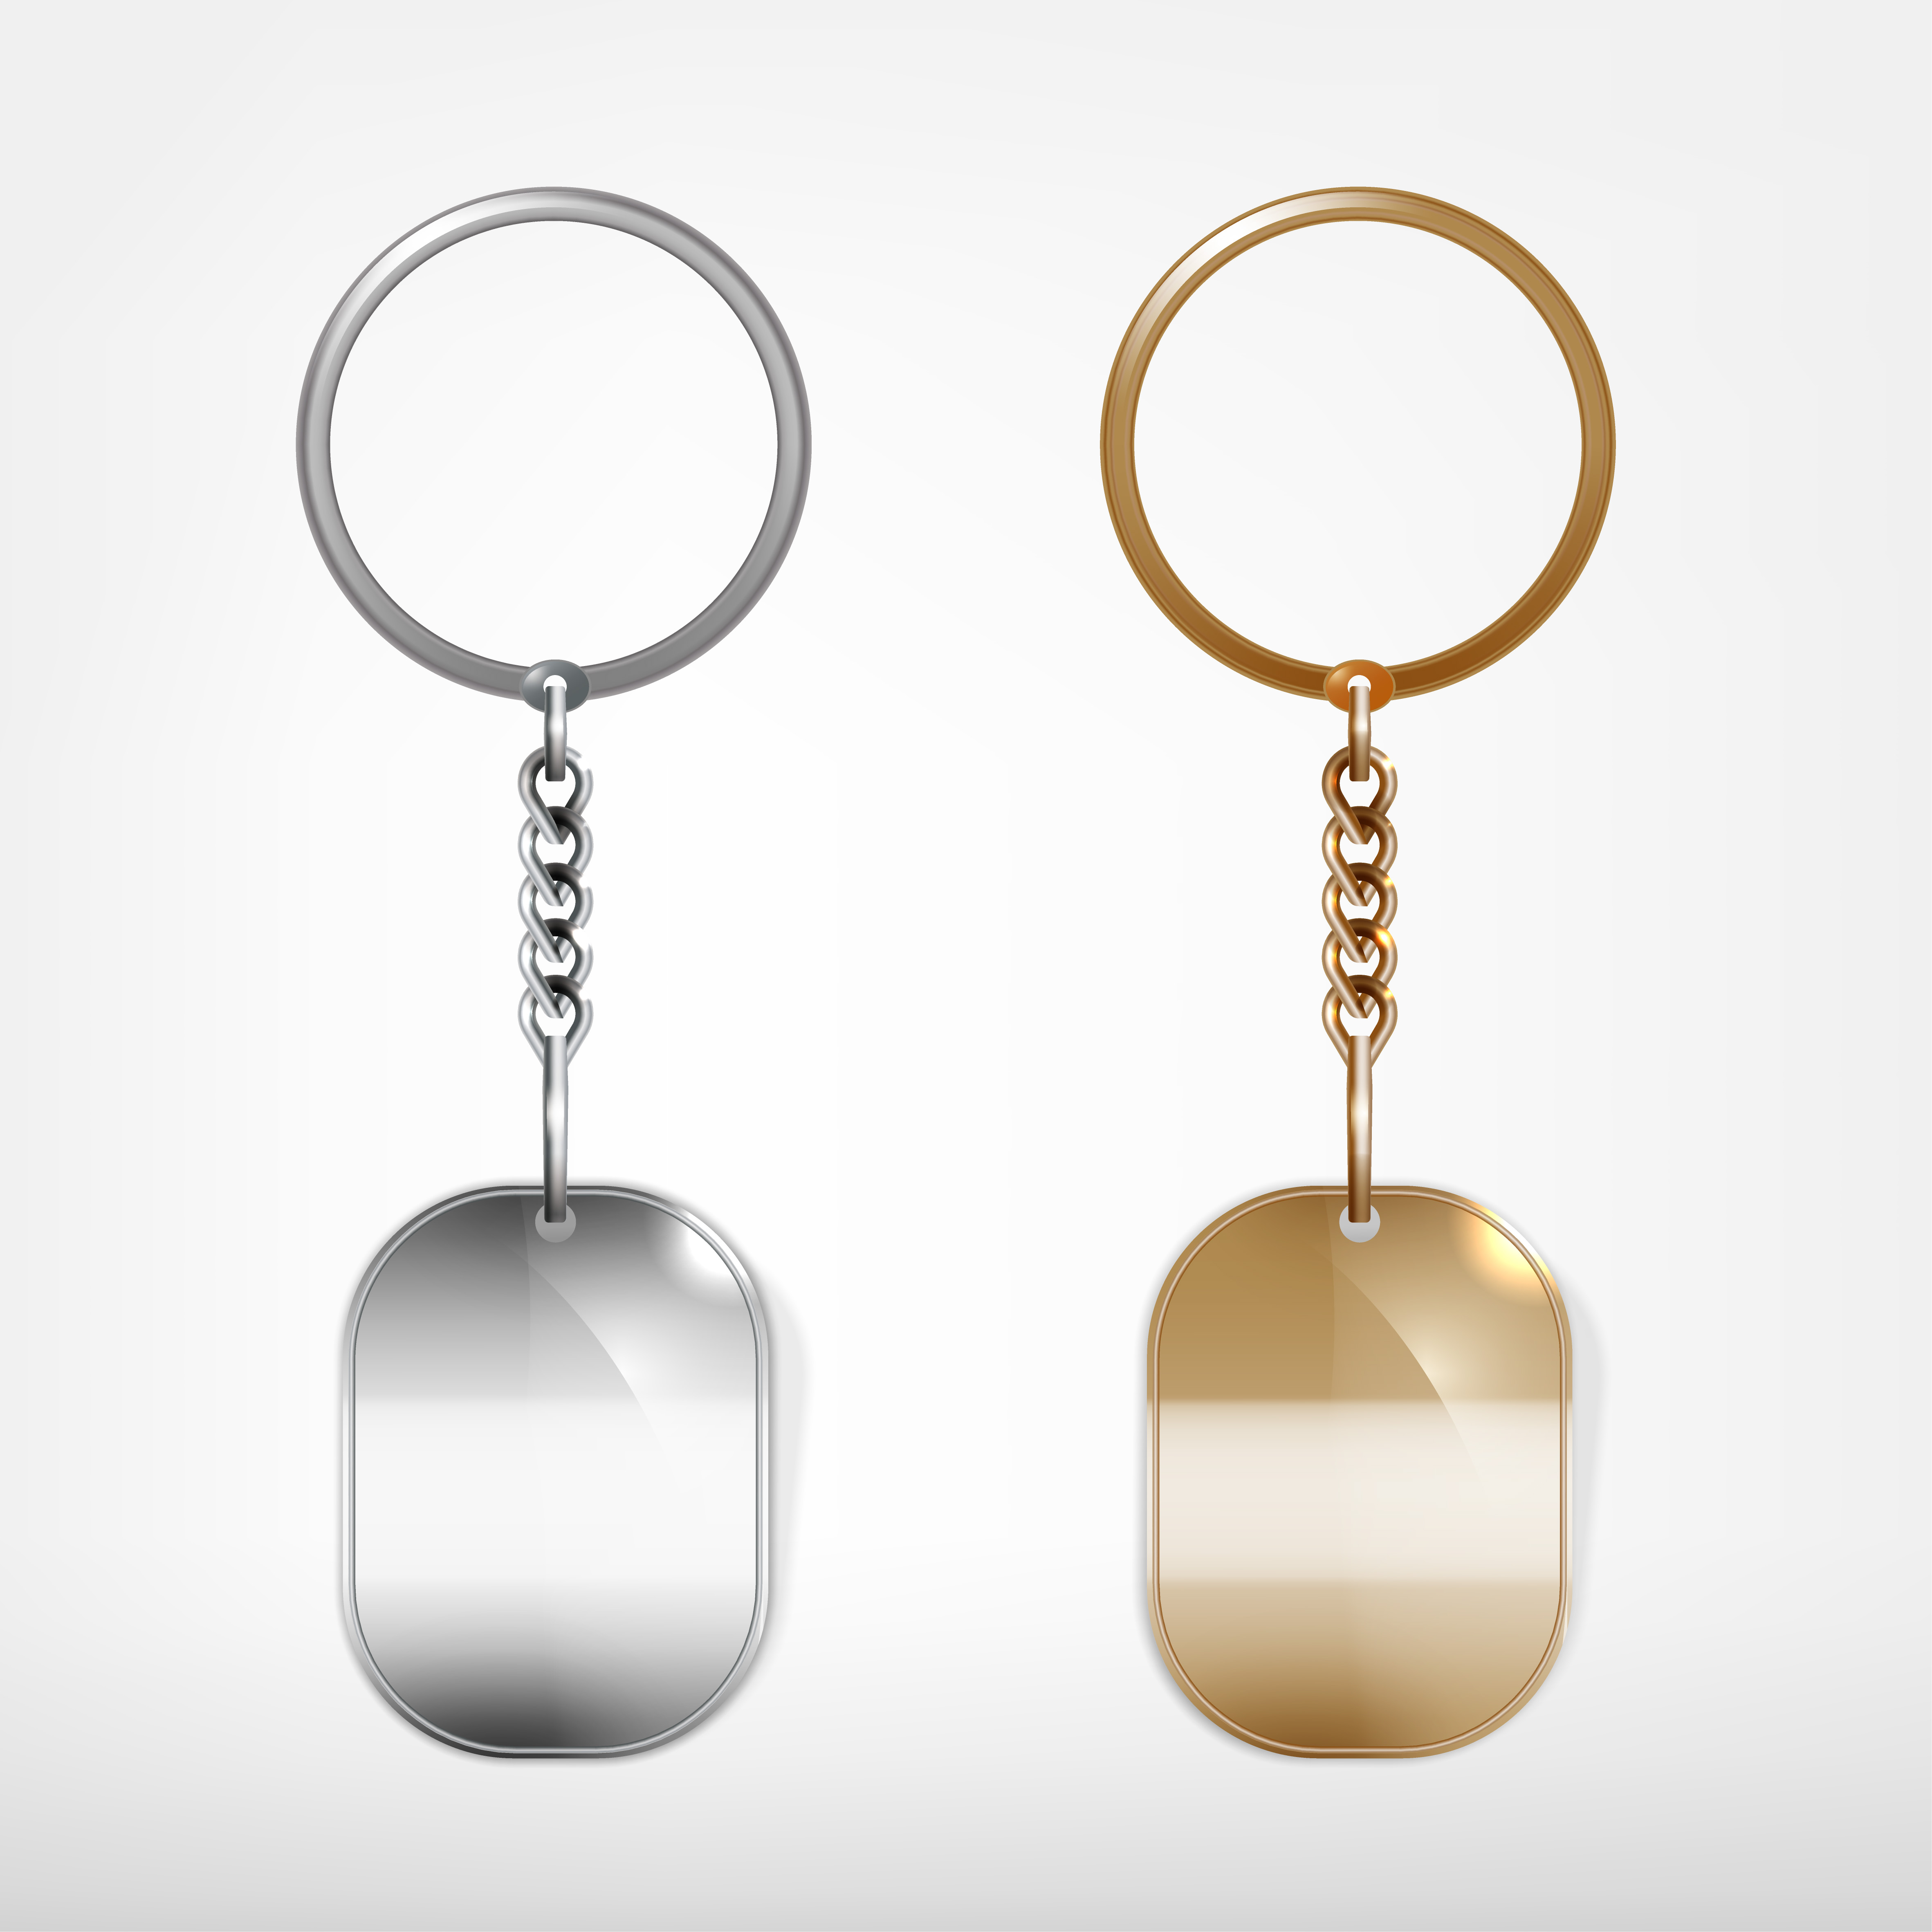 Download Shining keychain template vectors 04 free download